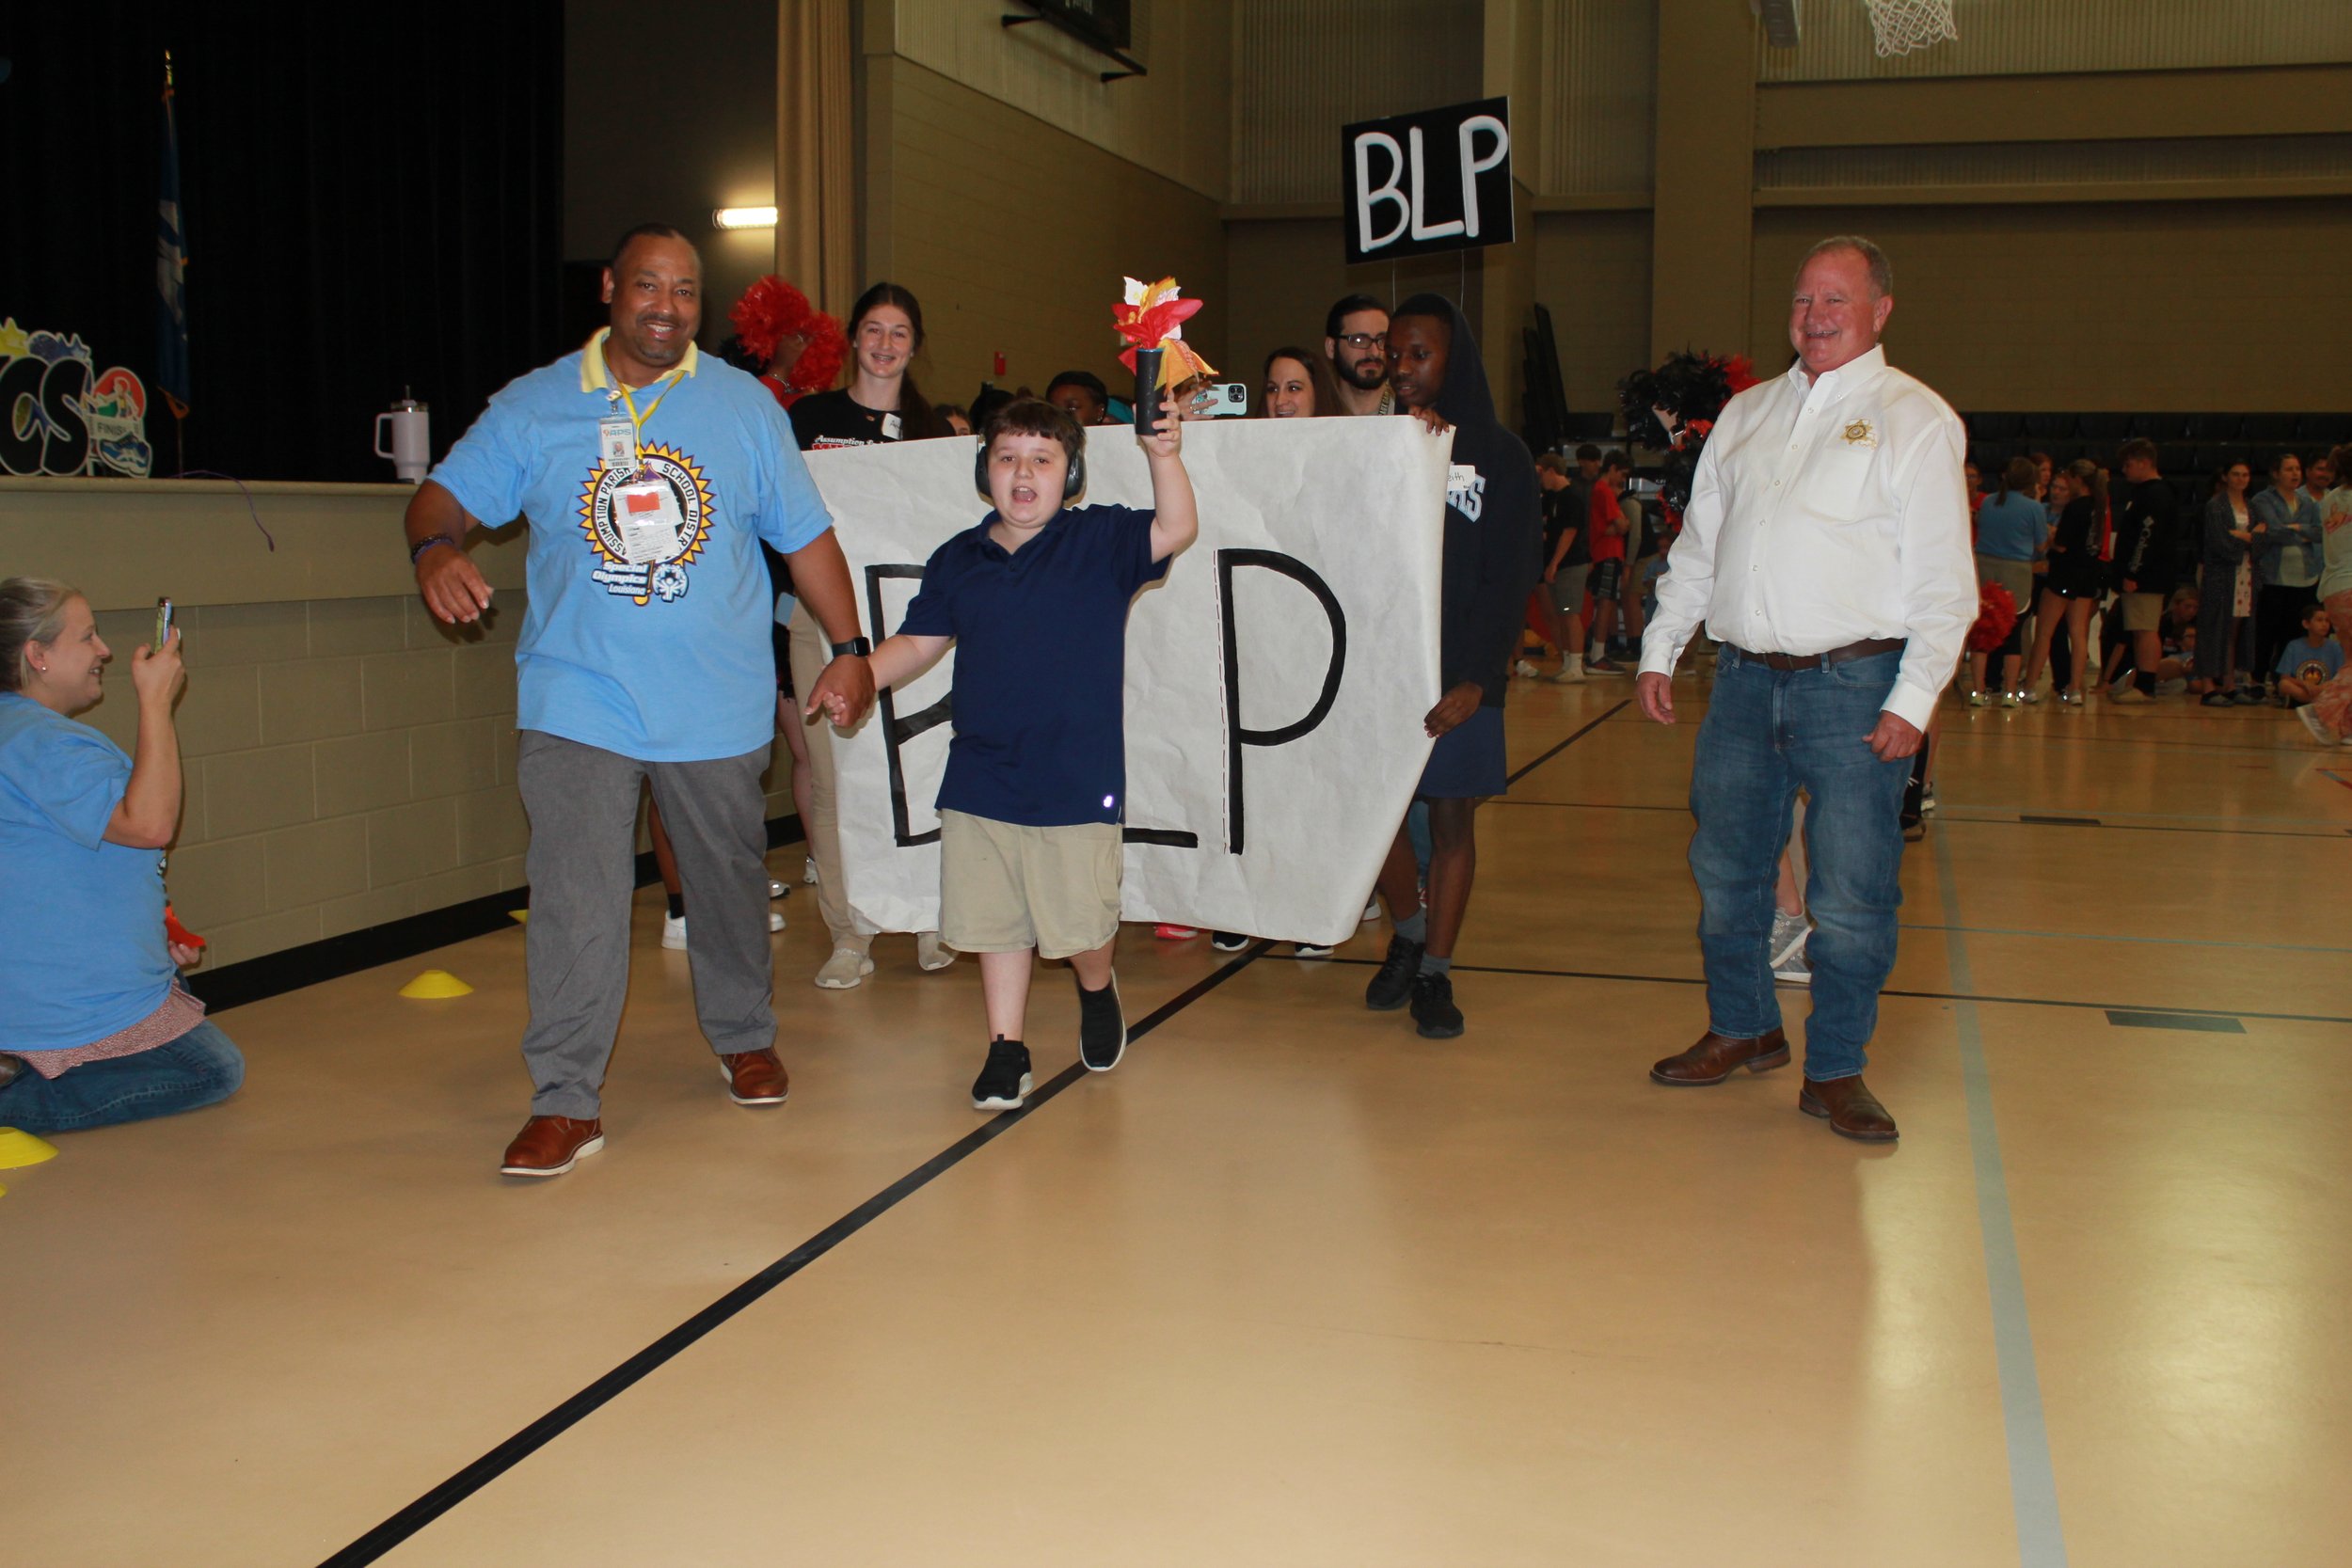  Superintendent Dr. John Barthelemy, left, student Tucker Barras, and Sheriff Leland Falcon lead the procession for Bayou L’Ourse Primary School during the start of the Assumption Parish Public School Special Olympics.&nbsp; The event was held May 10